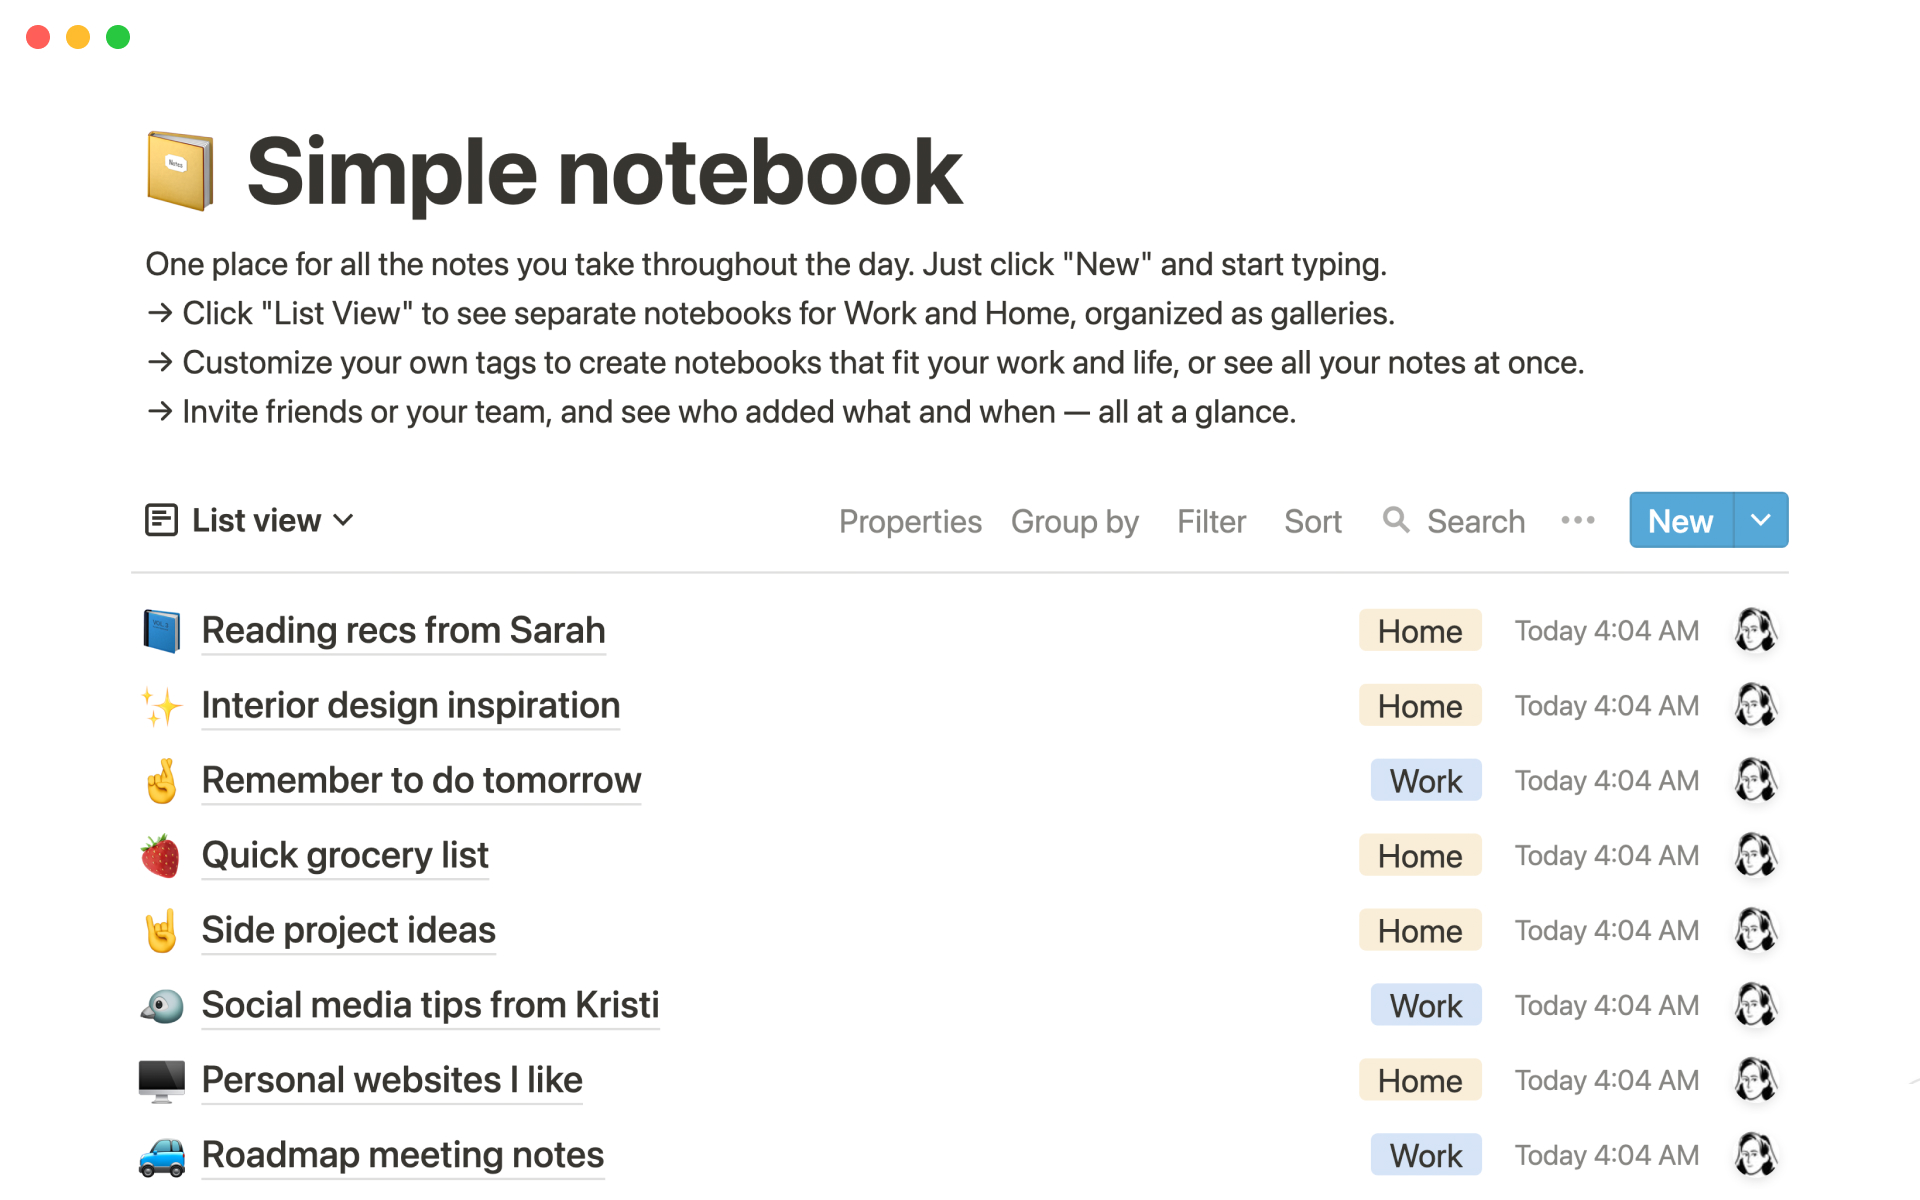 One place for all the notes you take throughout the day. Just click "New" and start typing. 